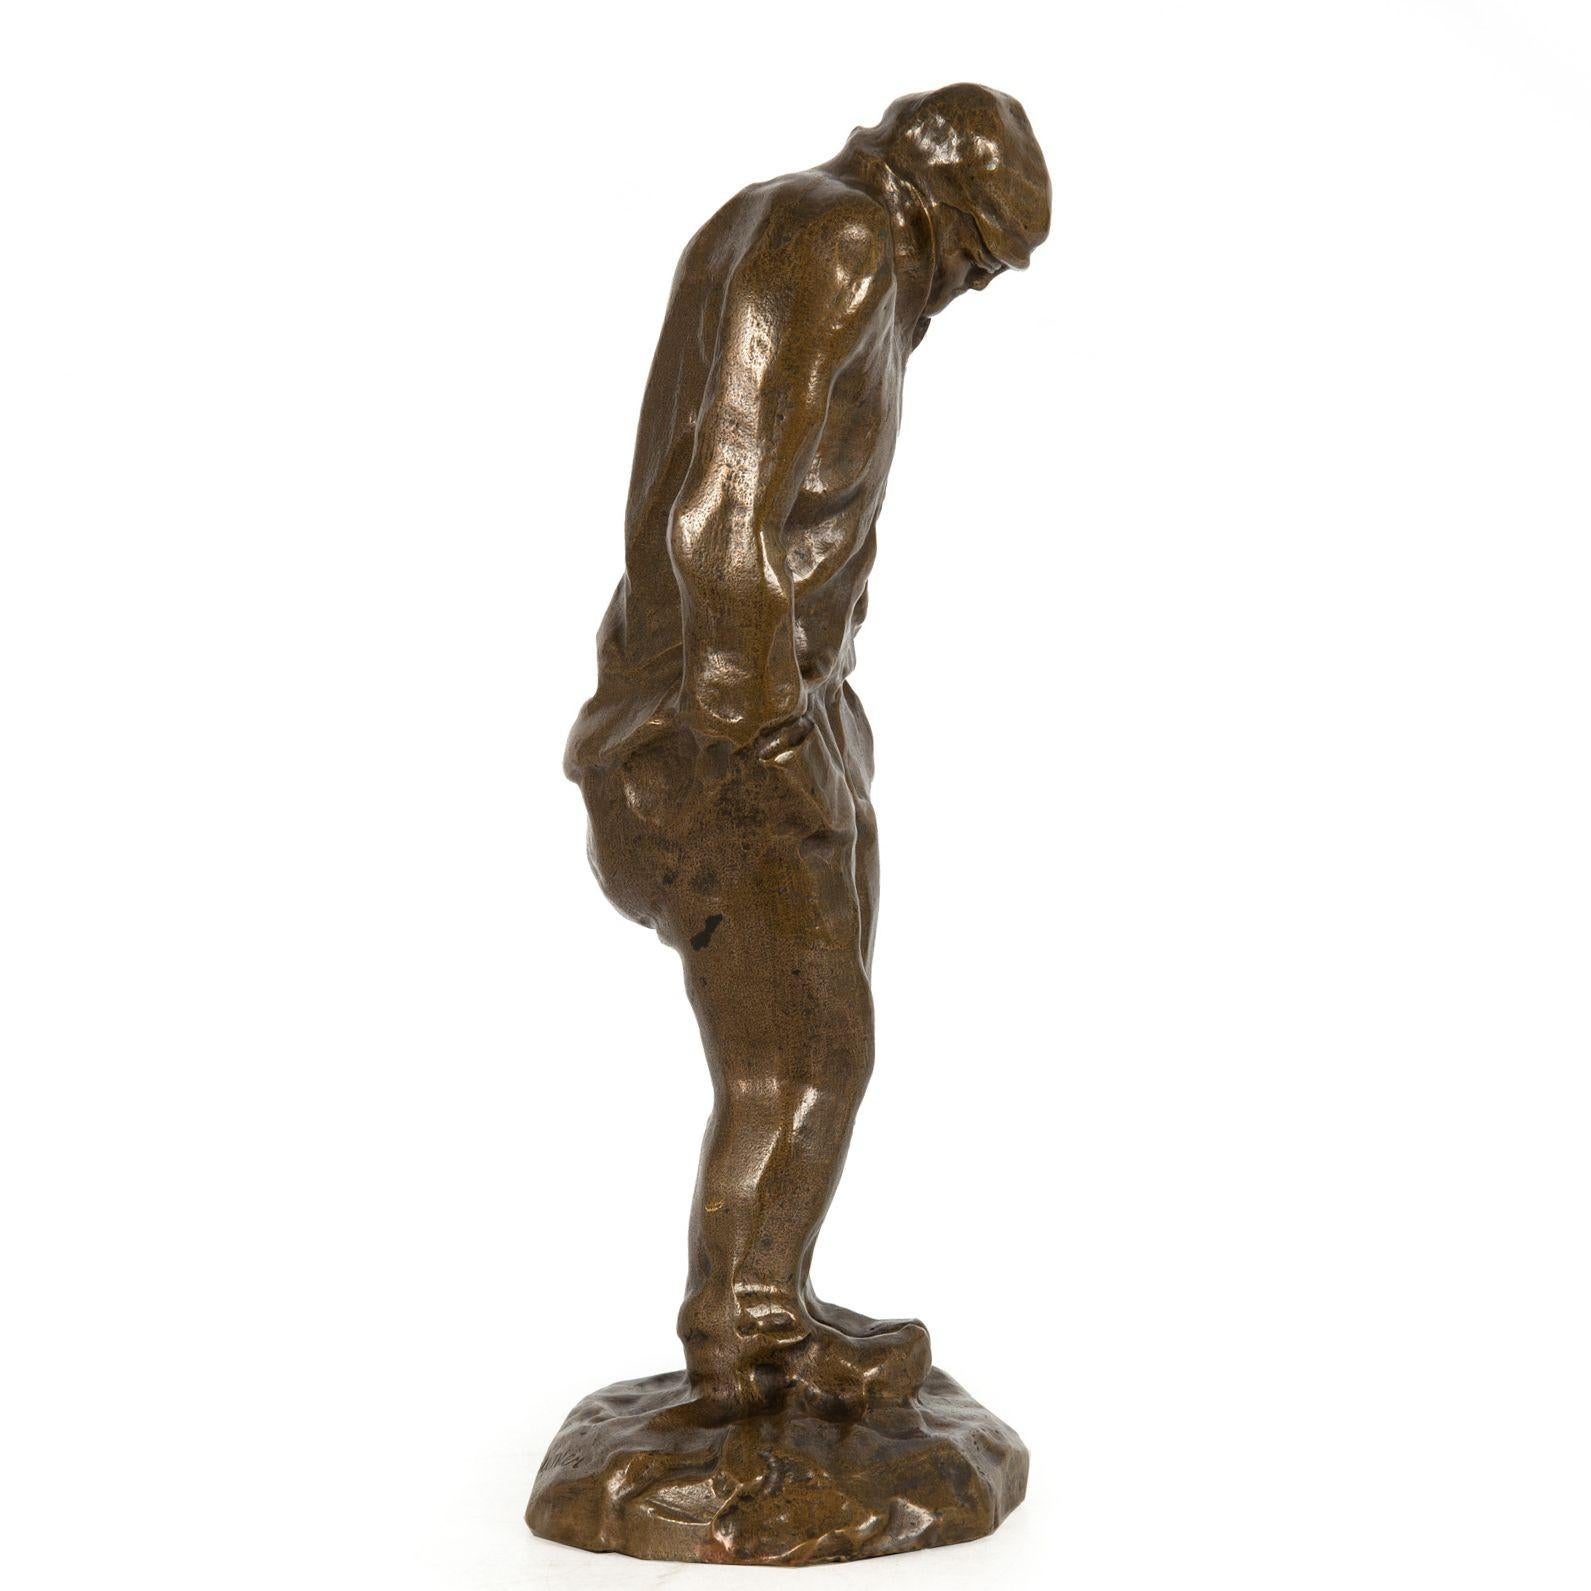 French Bronze Sculpture “Shivering Worker” in manner of Constantin Meunier In Good Condition For Sale In Shippensburg, PA